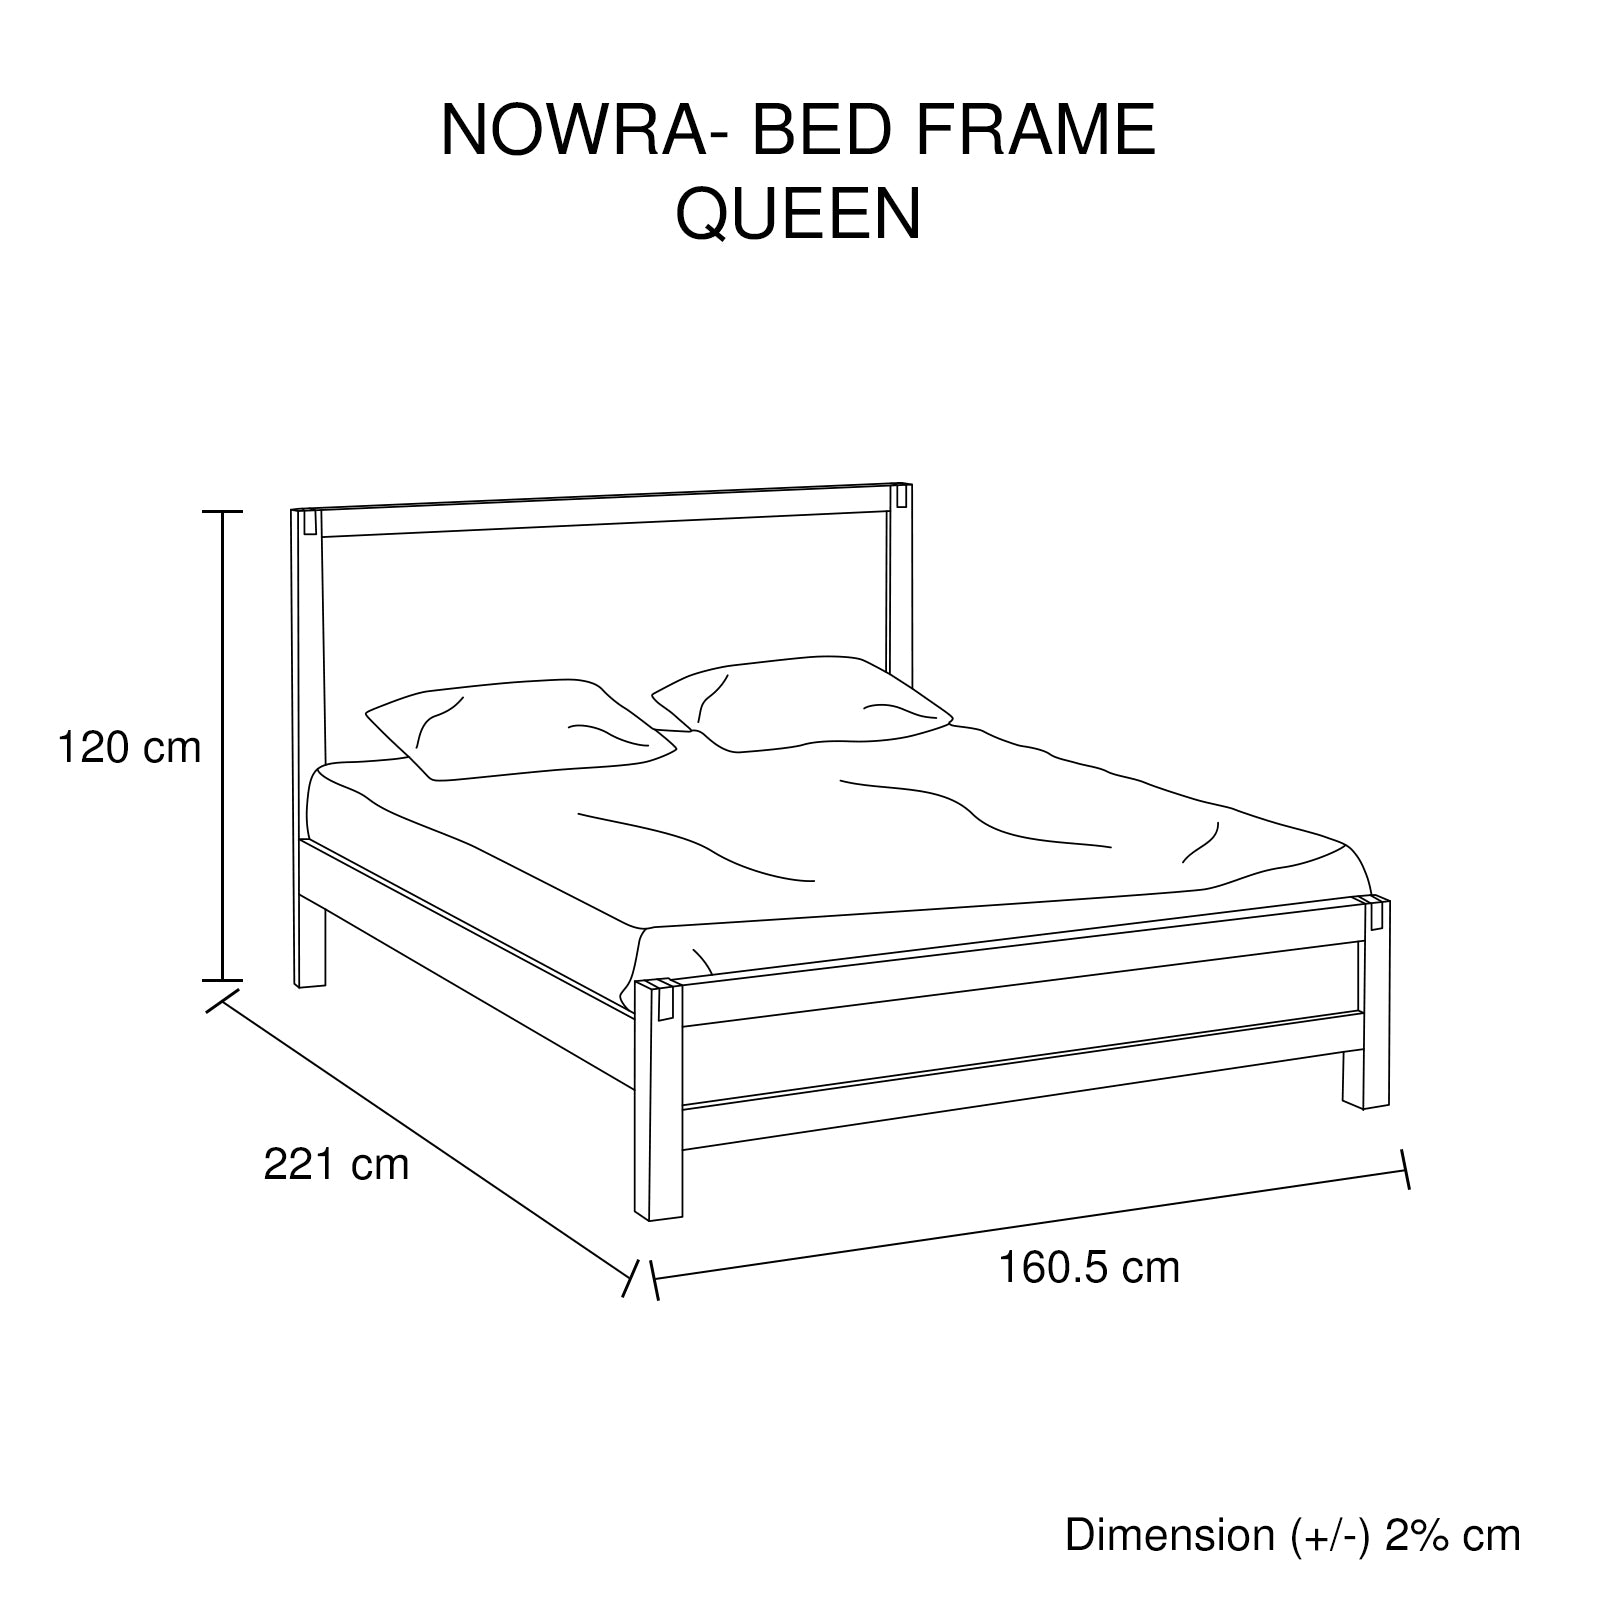 Bed Frame Queen Size in Solid Wood Veneered Acacia Bedroom Timber Slat in Chocolate-Bed Frames-PEROZ Accessories